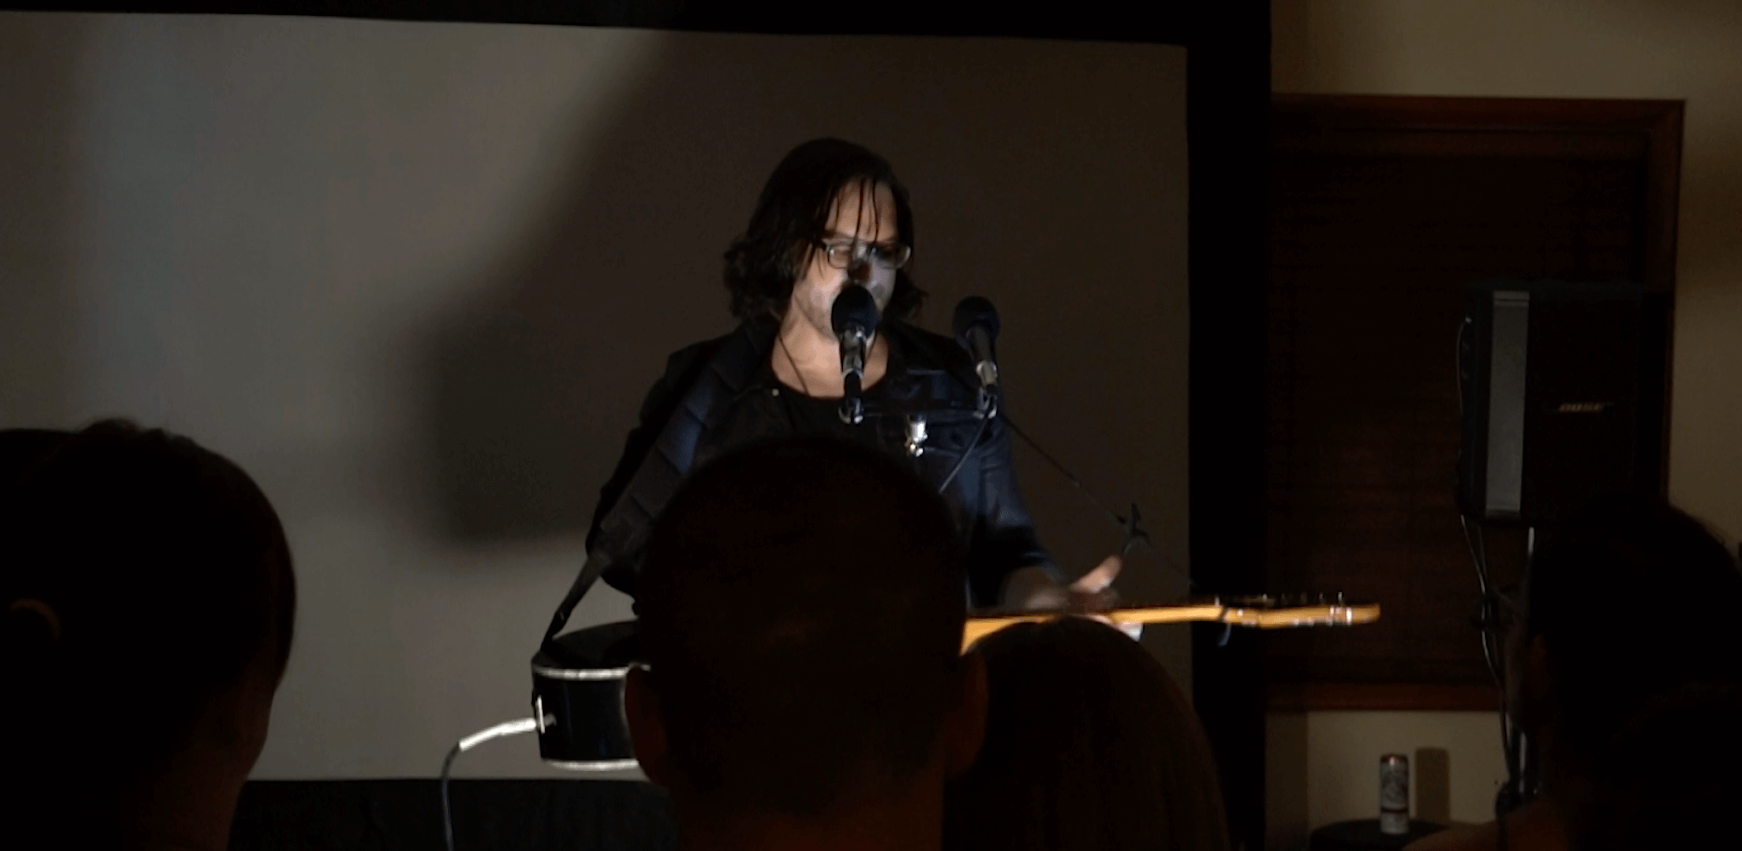 VIDEO: MikelParis Gives a Full Performance with the Bose S1 Pro